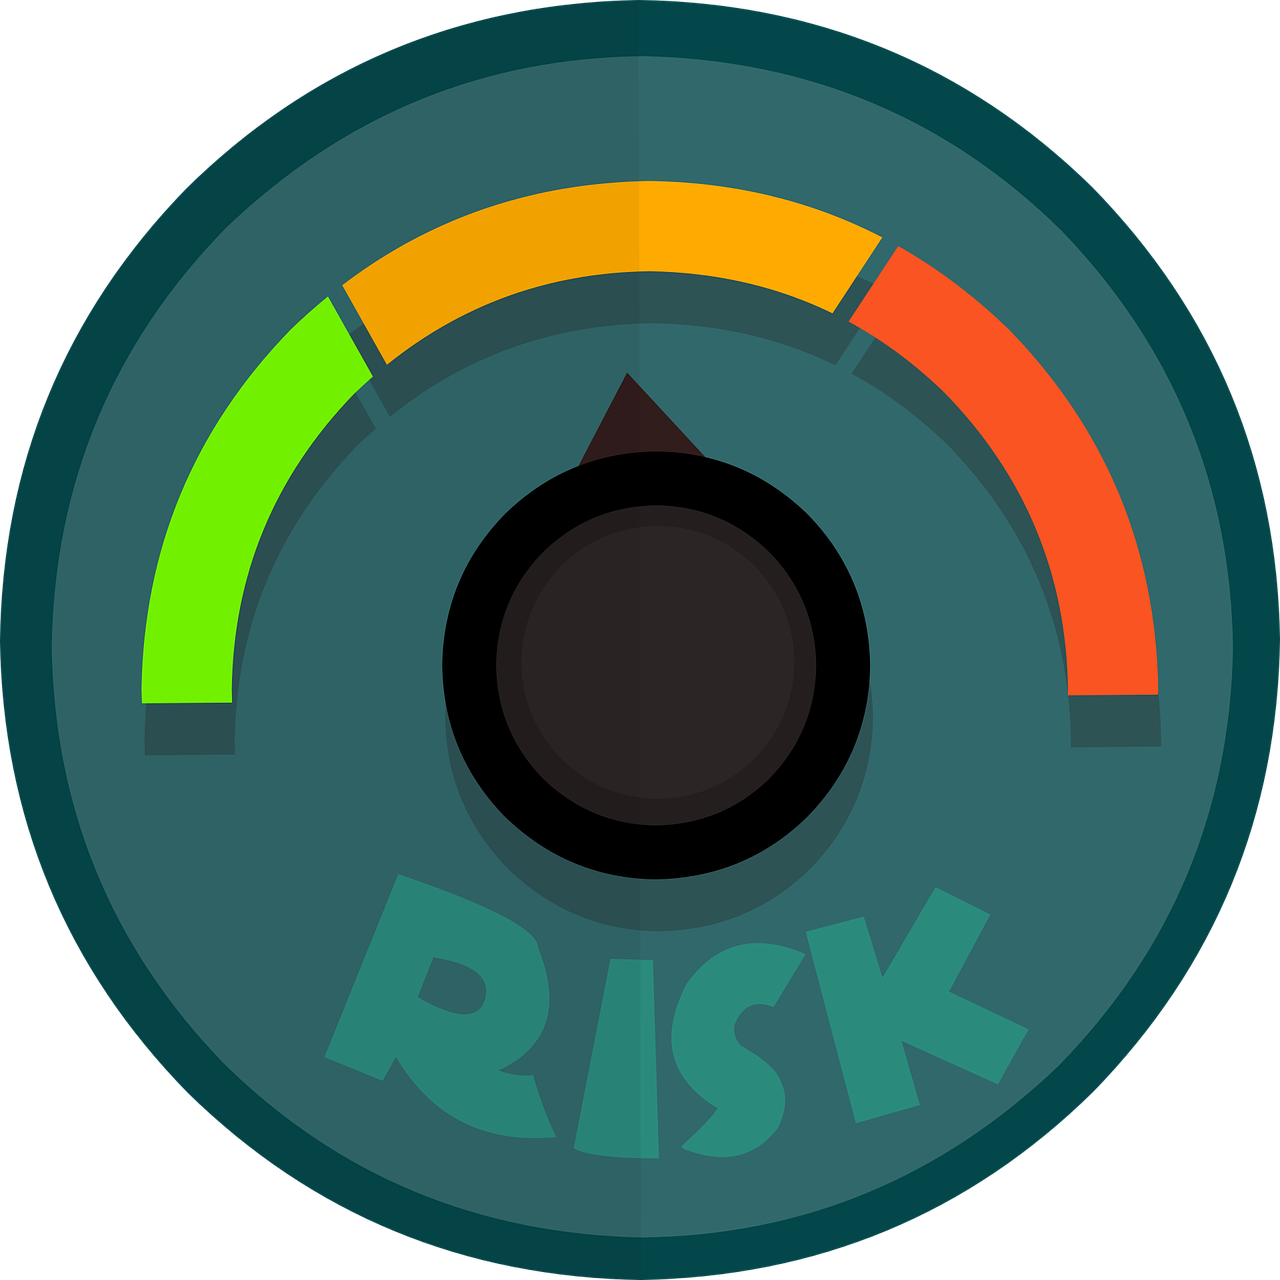 Risk Assessment - Supply Chain Resilience and Risk Management